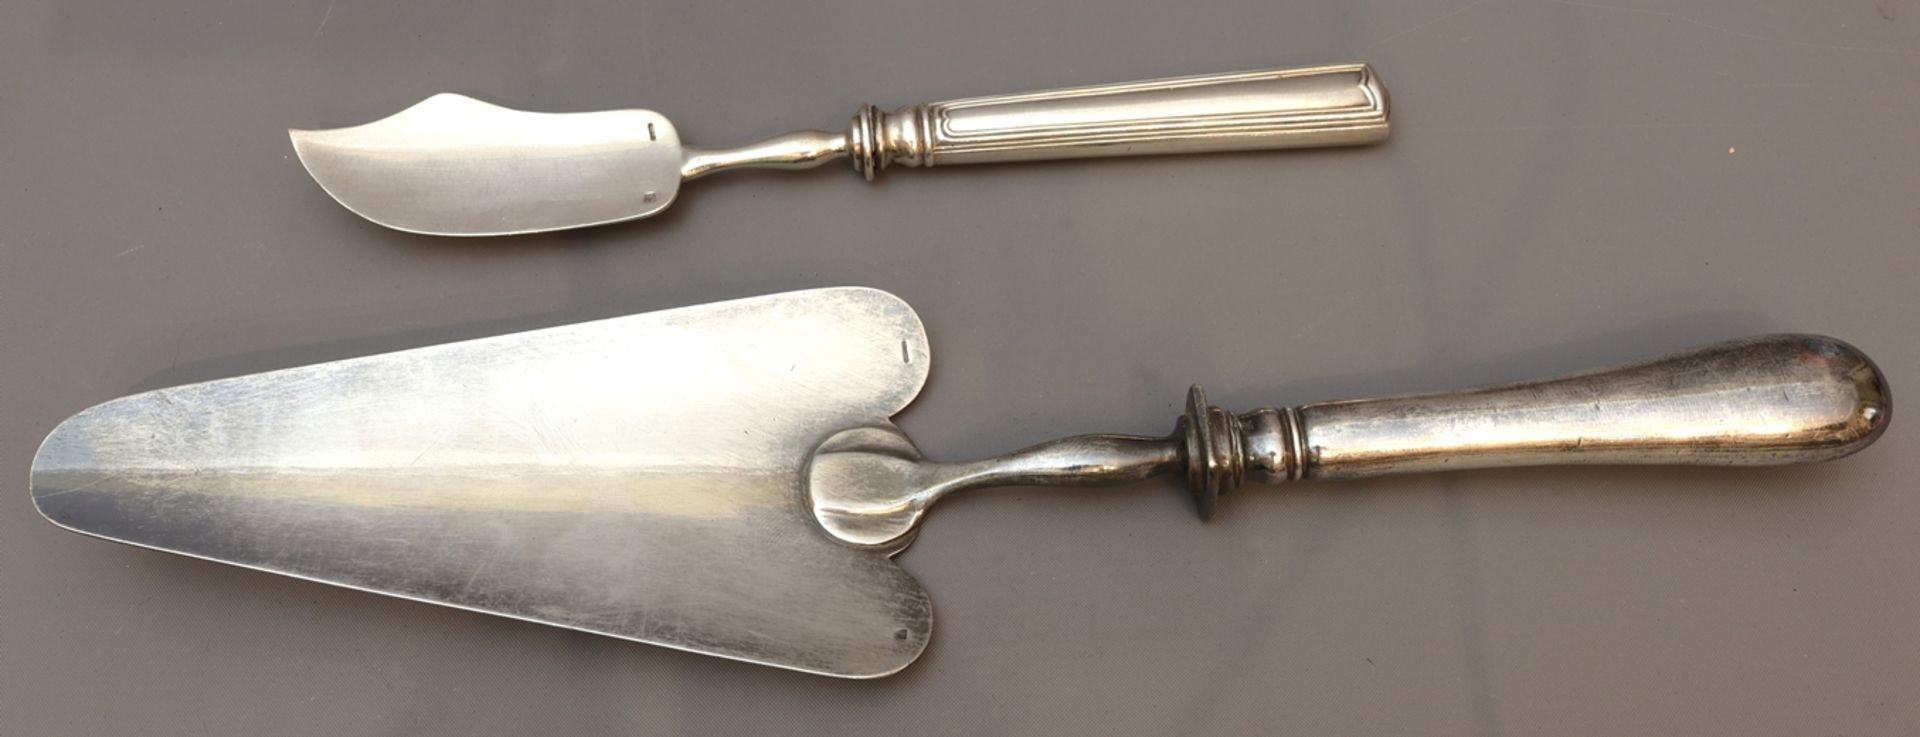 Cake lifter and cake knife, Historicism circa 1900, German